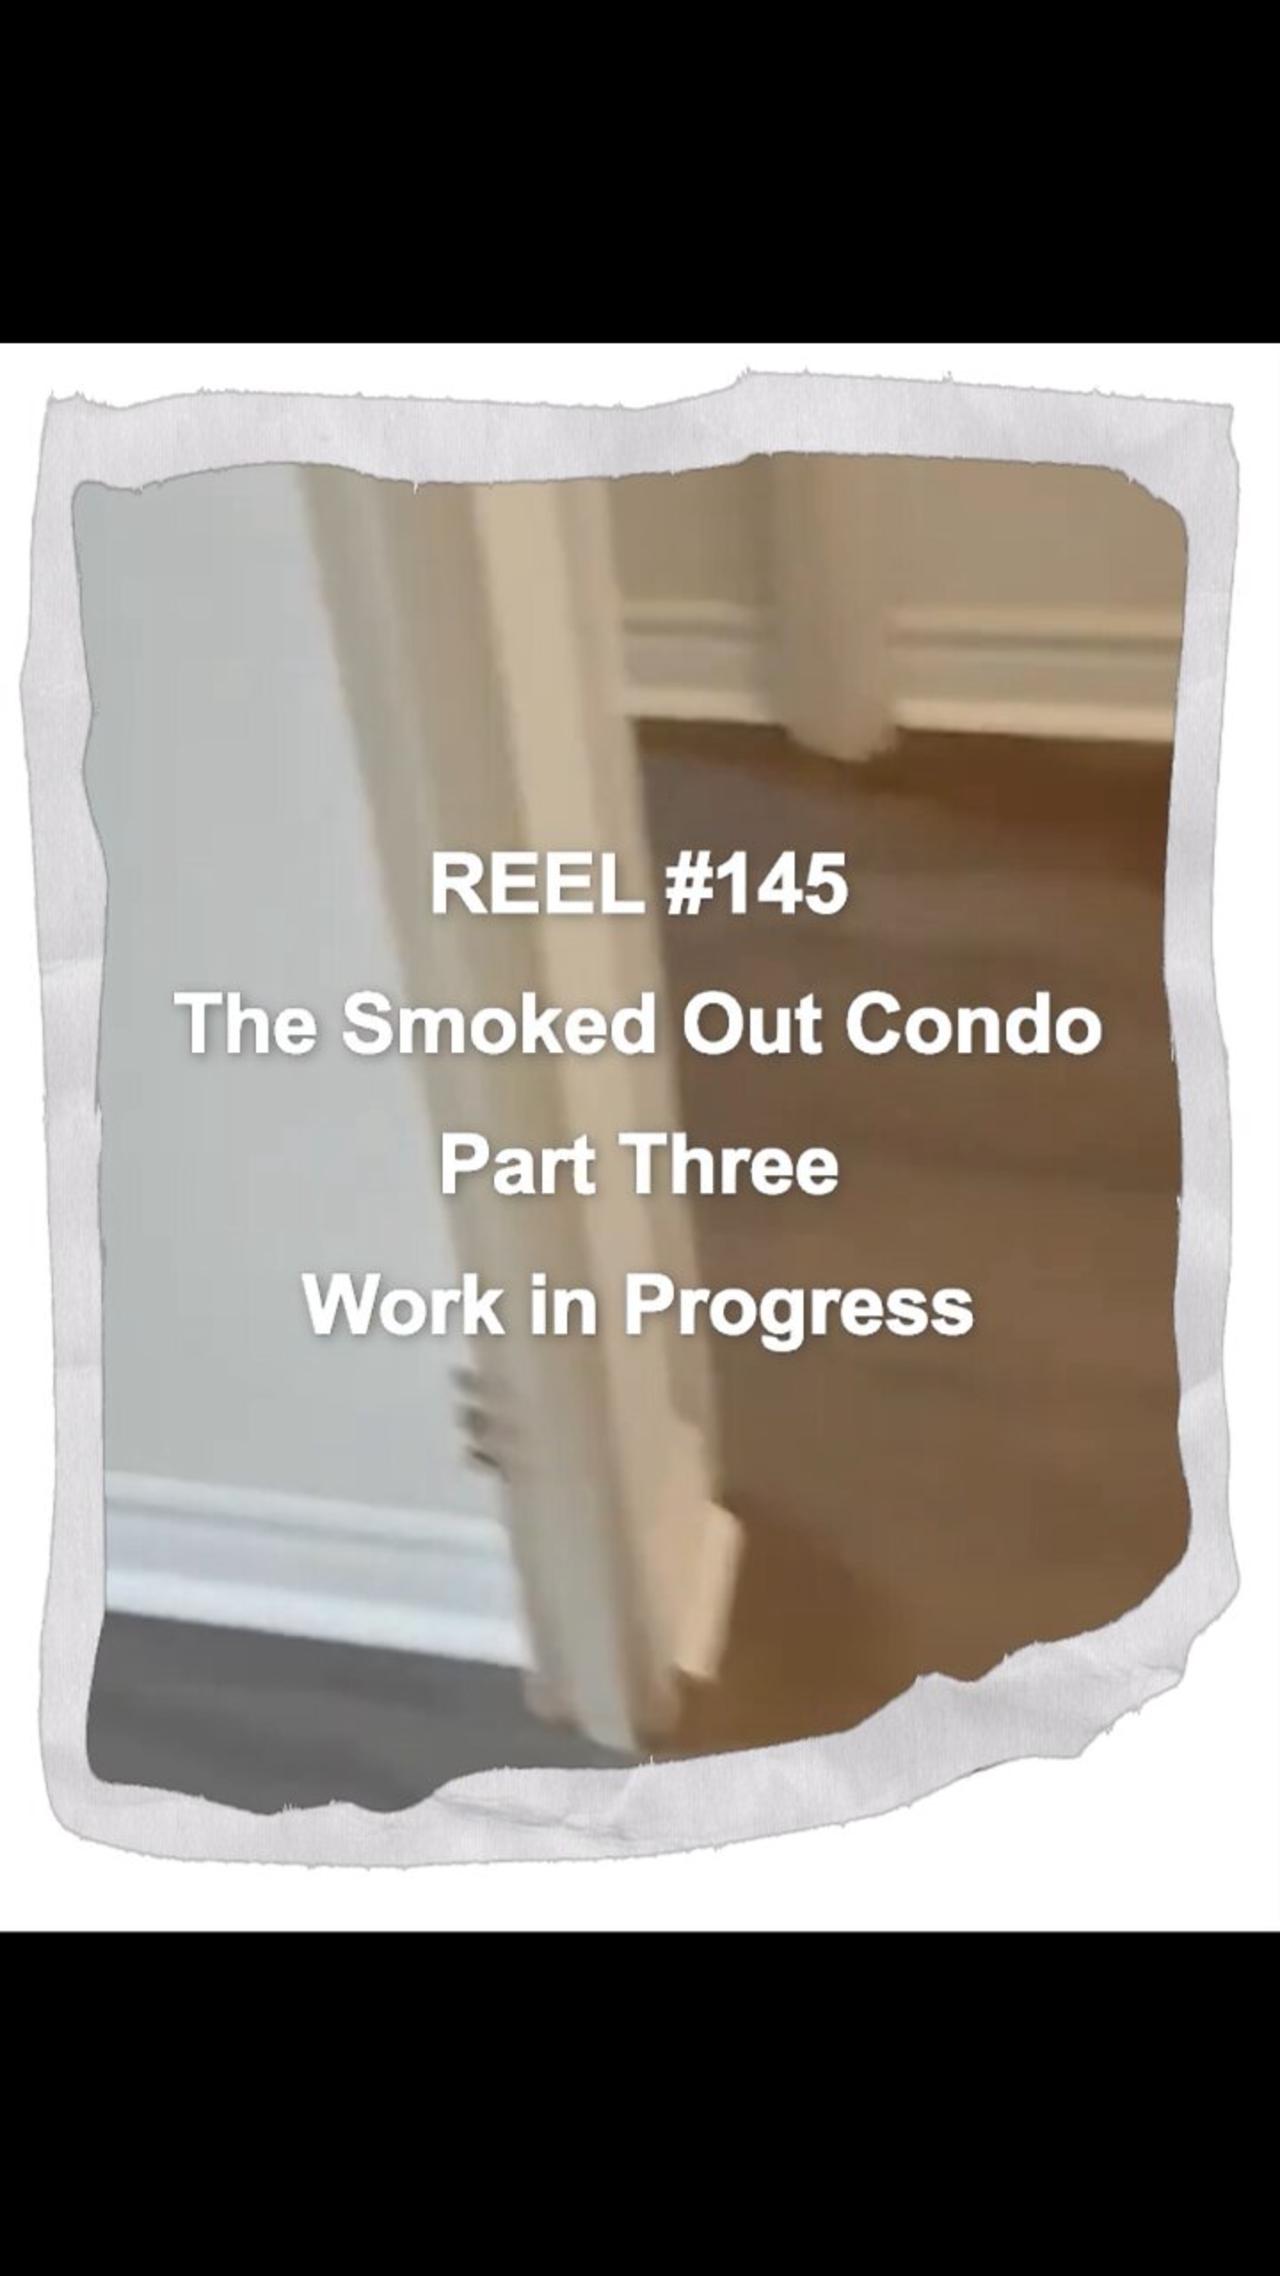 Reel #145 The Smoked Out Condo Part Three - Work in Progress